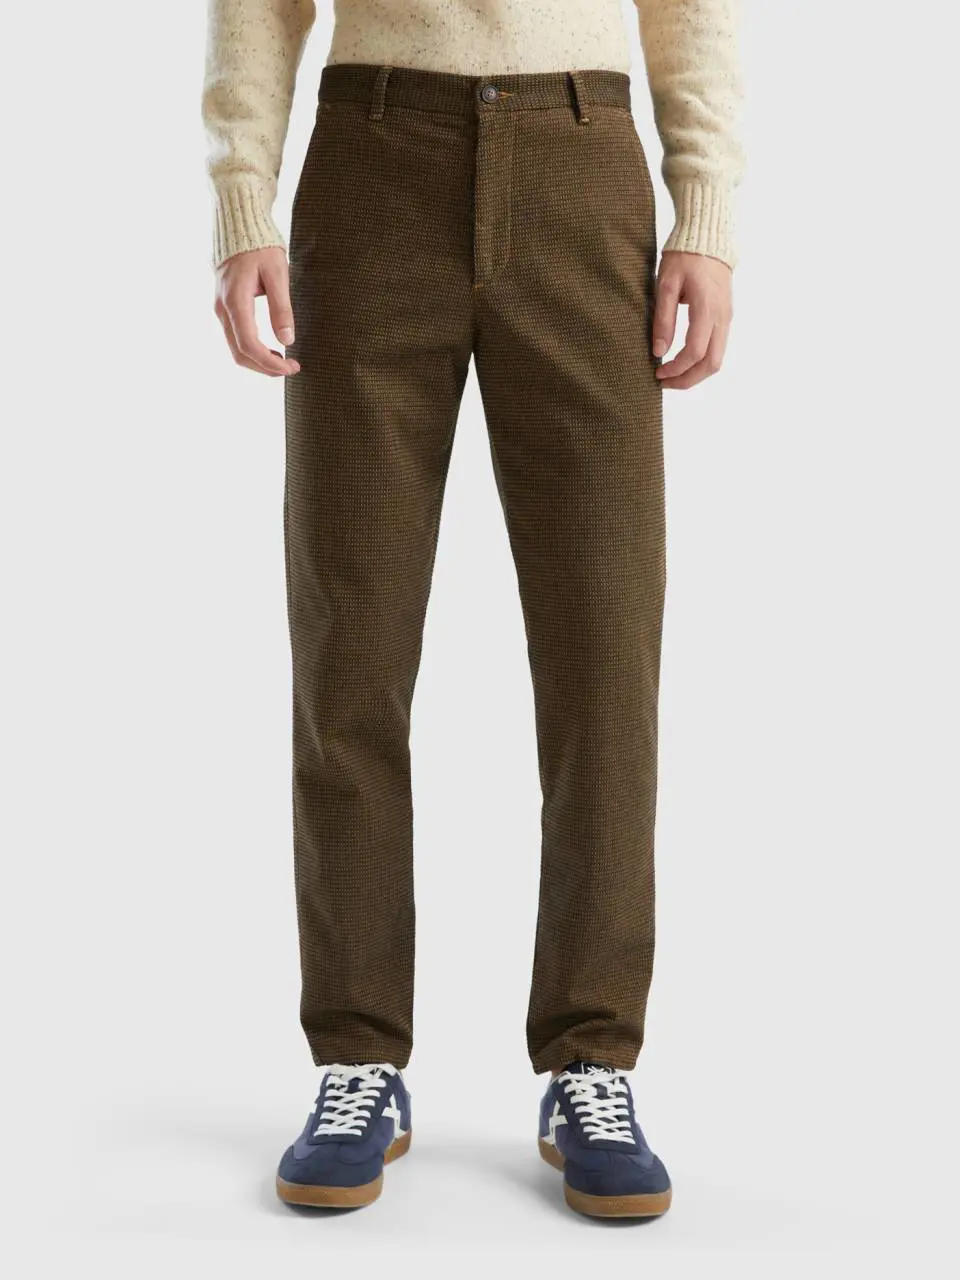 Benetton slim fit chinos with dropped crotch. 1